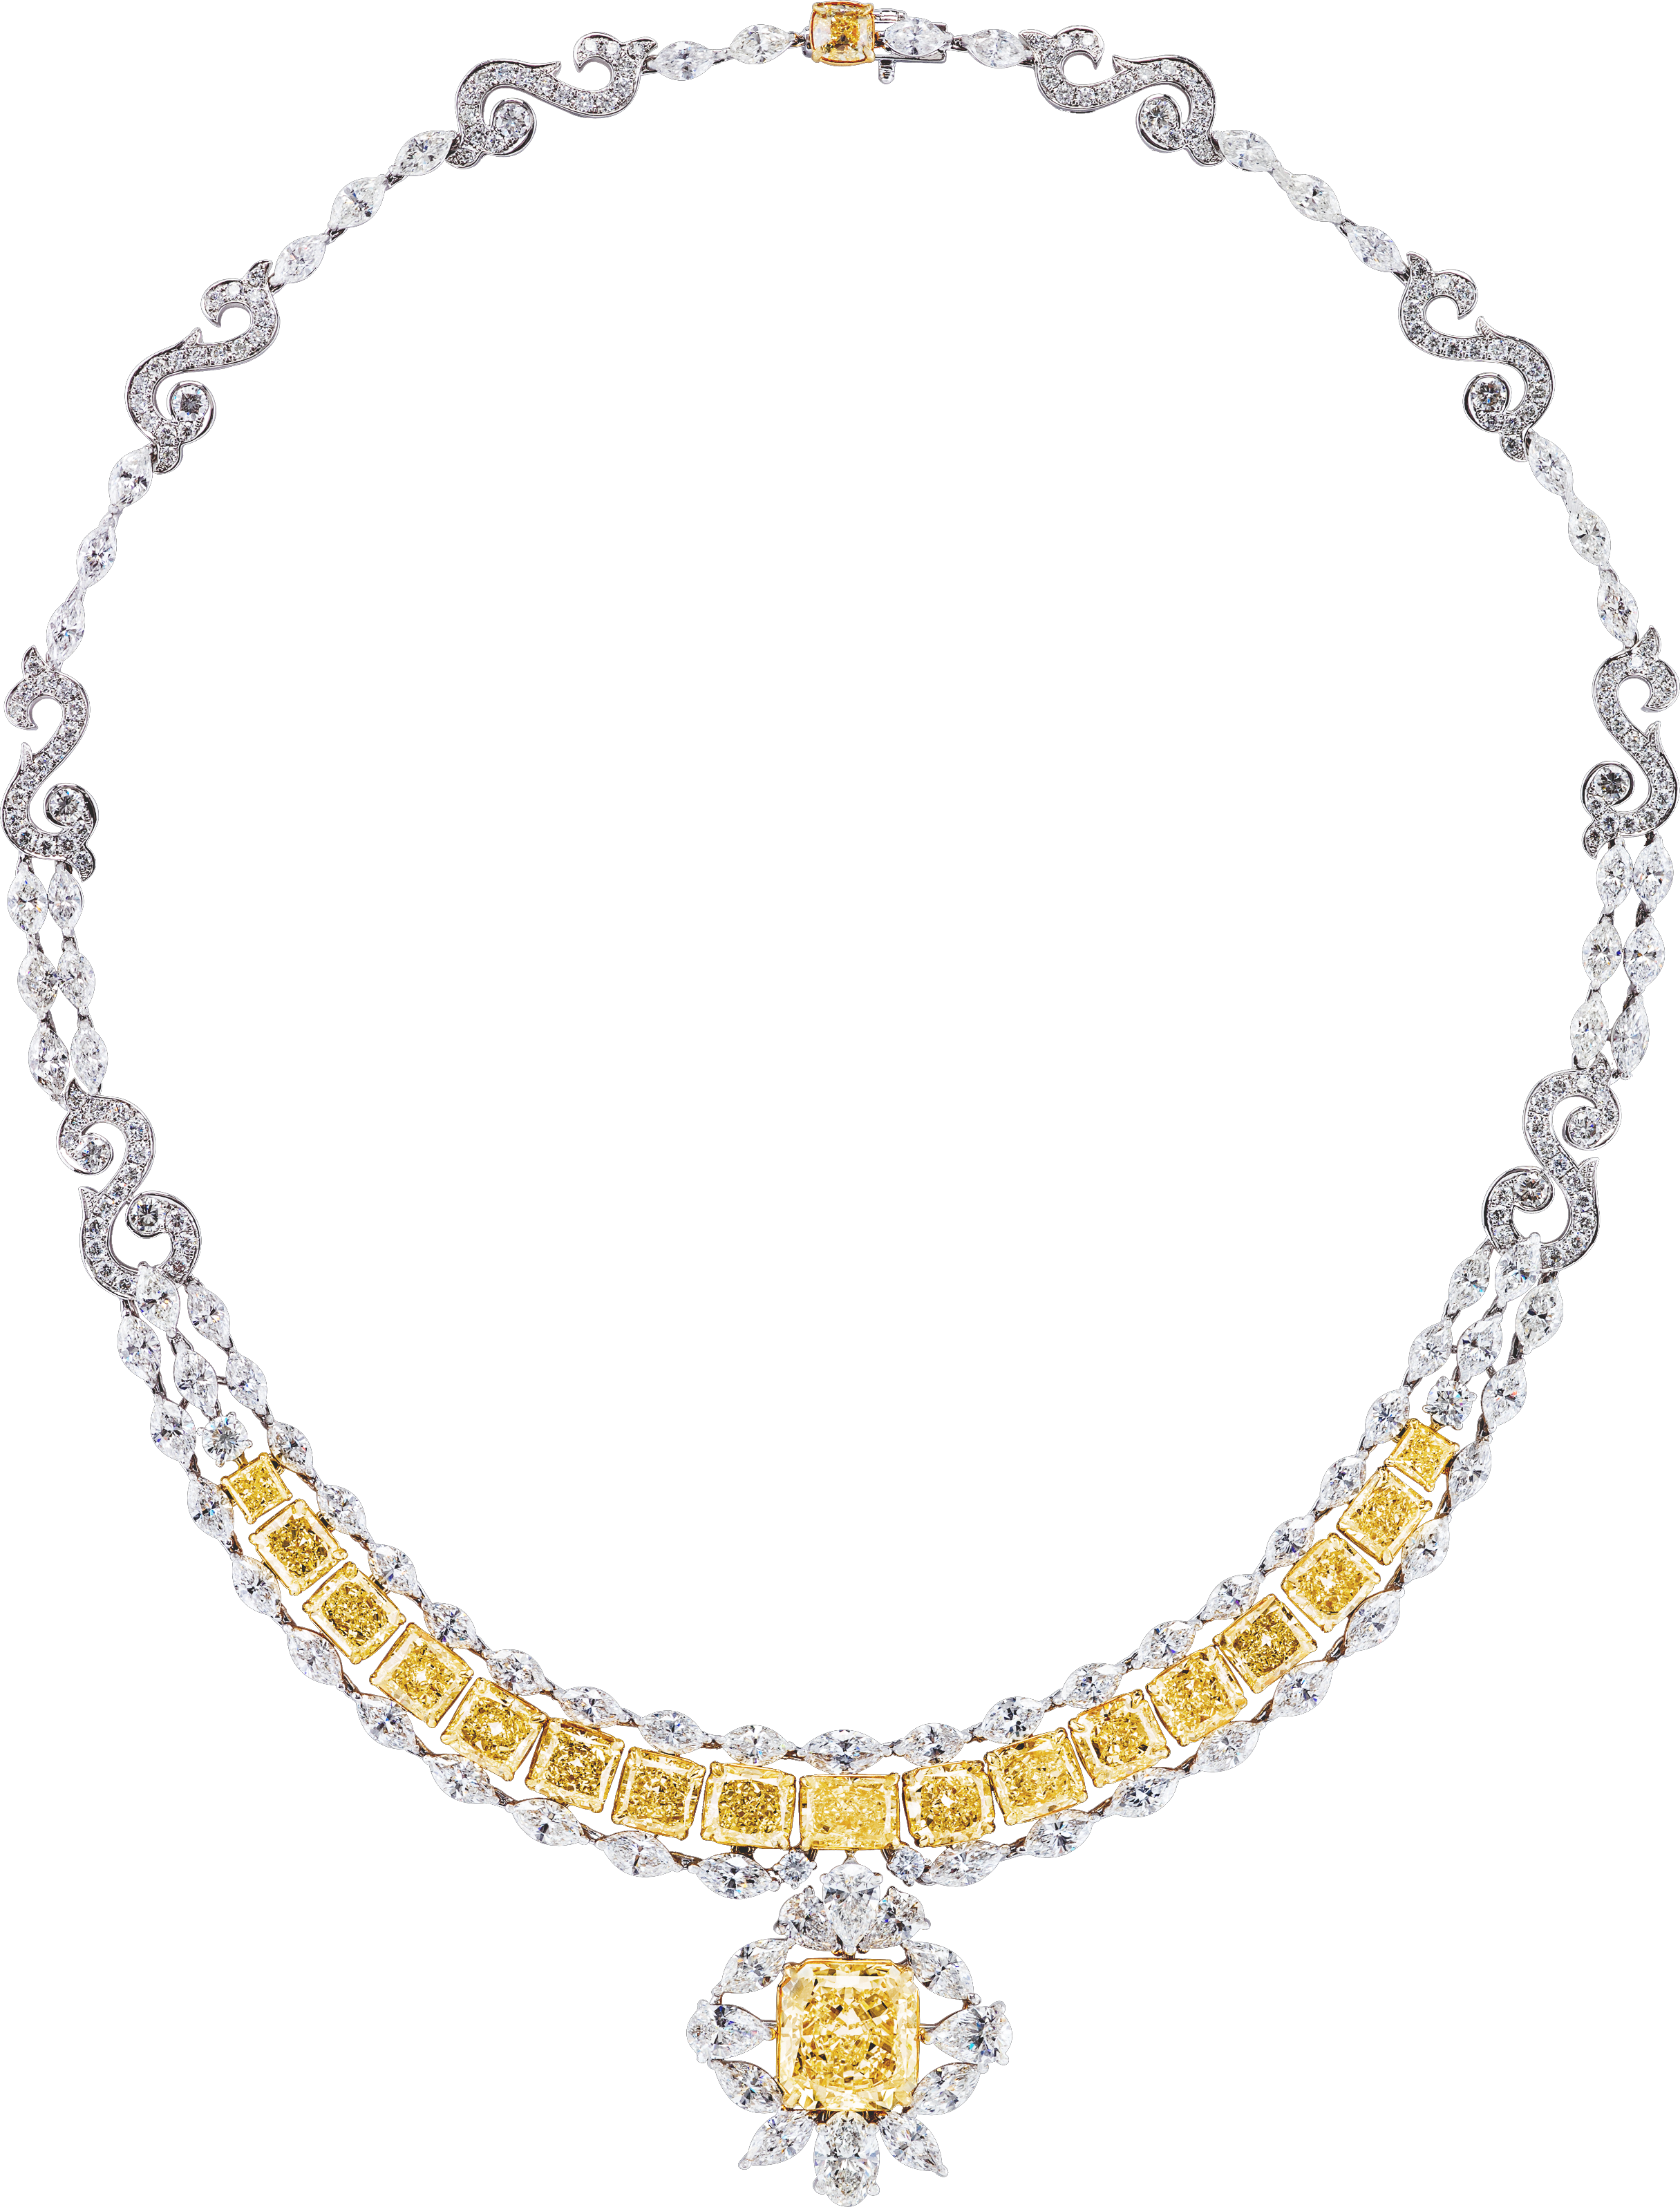 Extraordinary-GIA-Certified-50-Carat-Fancy-Yellow-Diamond-Necklace-in-18K-Gold-Necklace-2.png